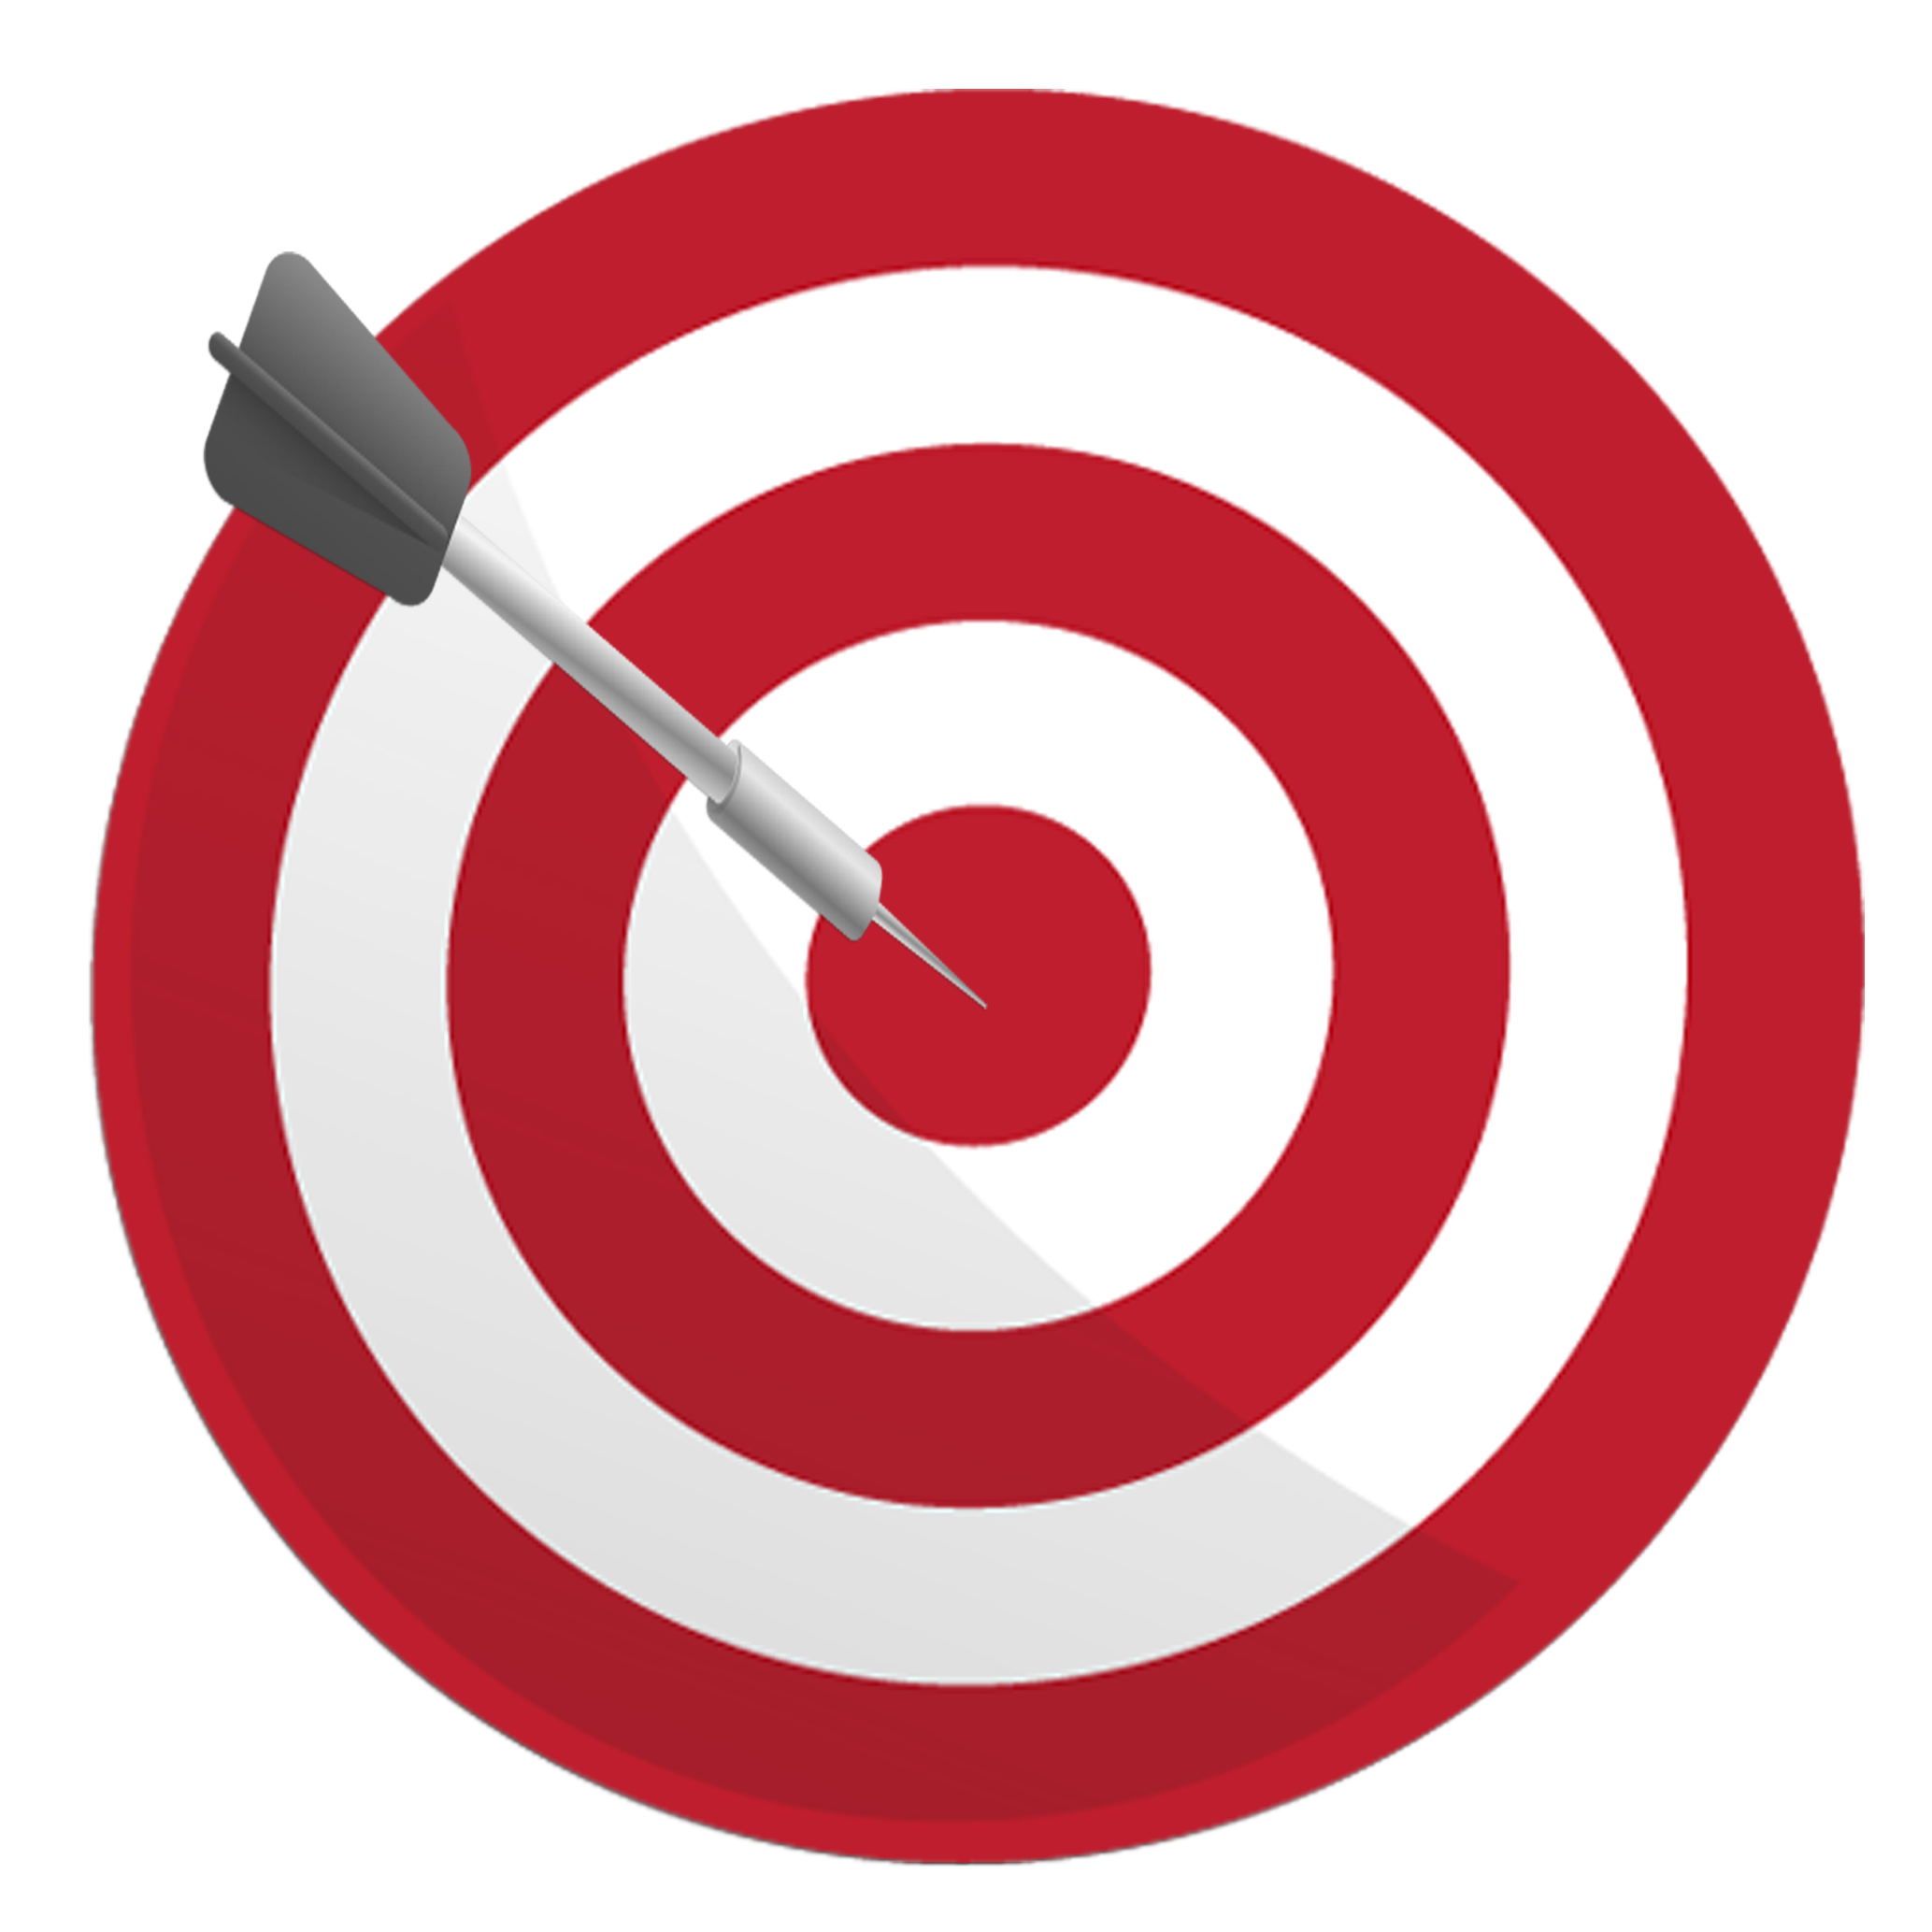 Dartboard With Arrow Png Transparent Image - Dart Board, Transparent background PNG HD thumbnail